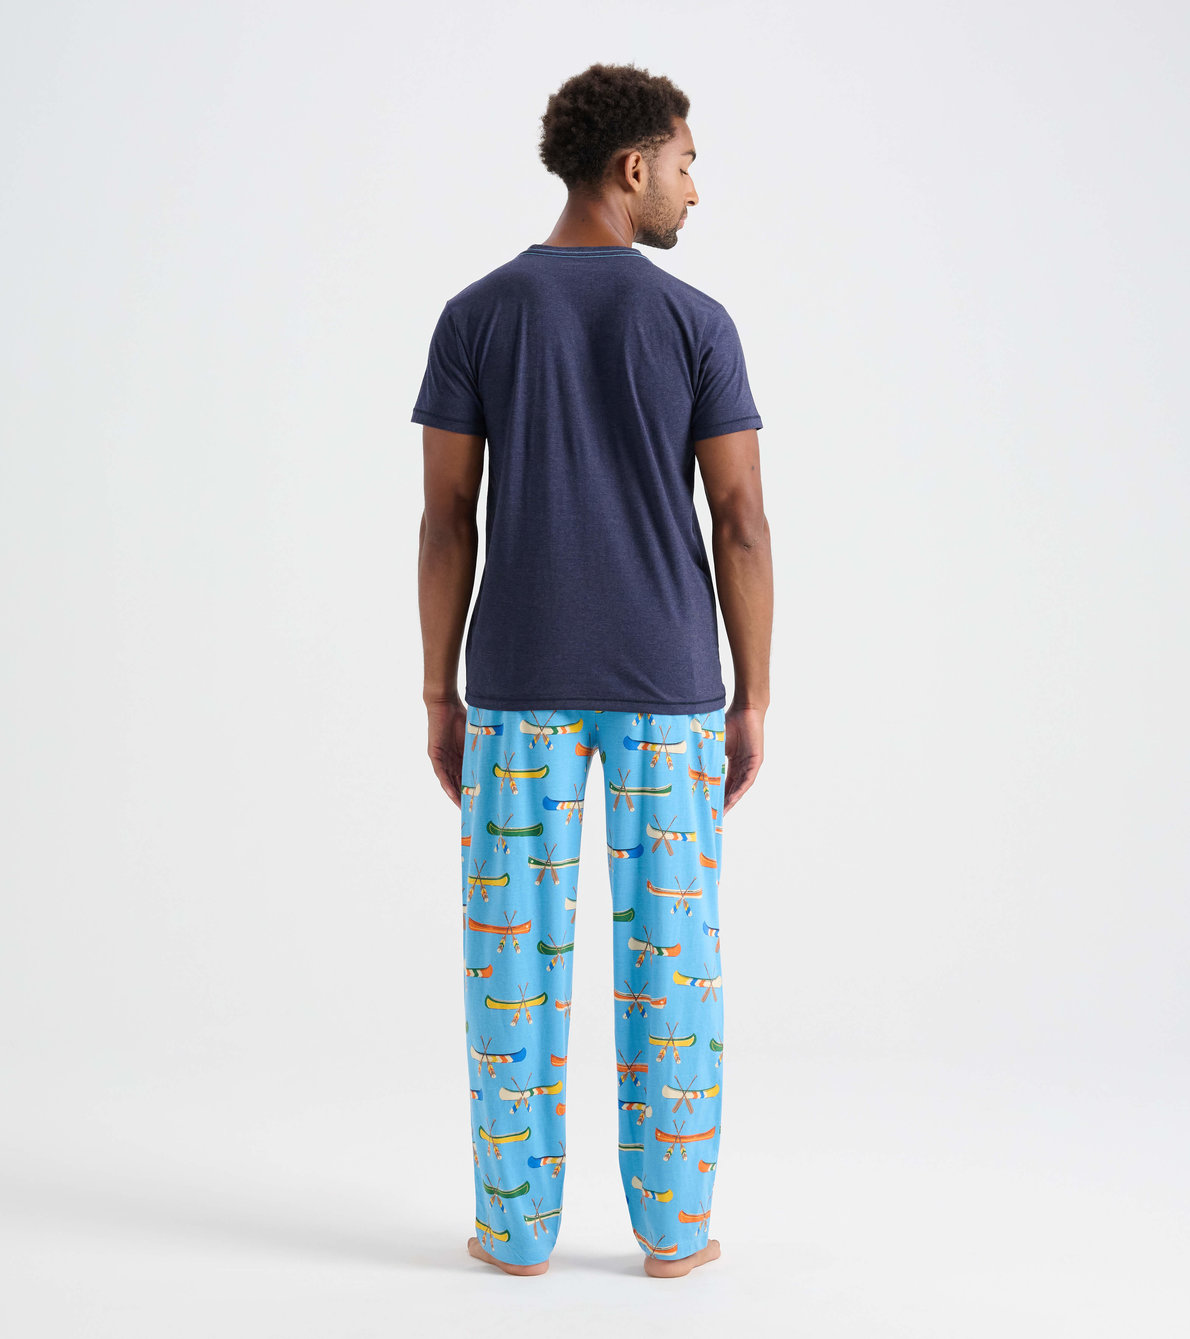 View larger image of Men's Paddle Your Own Canoe T-Shirt and Pants Pajama Separates